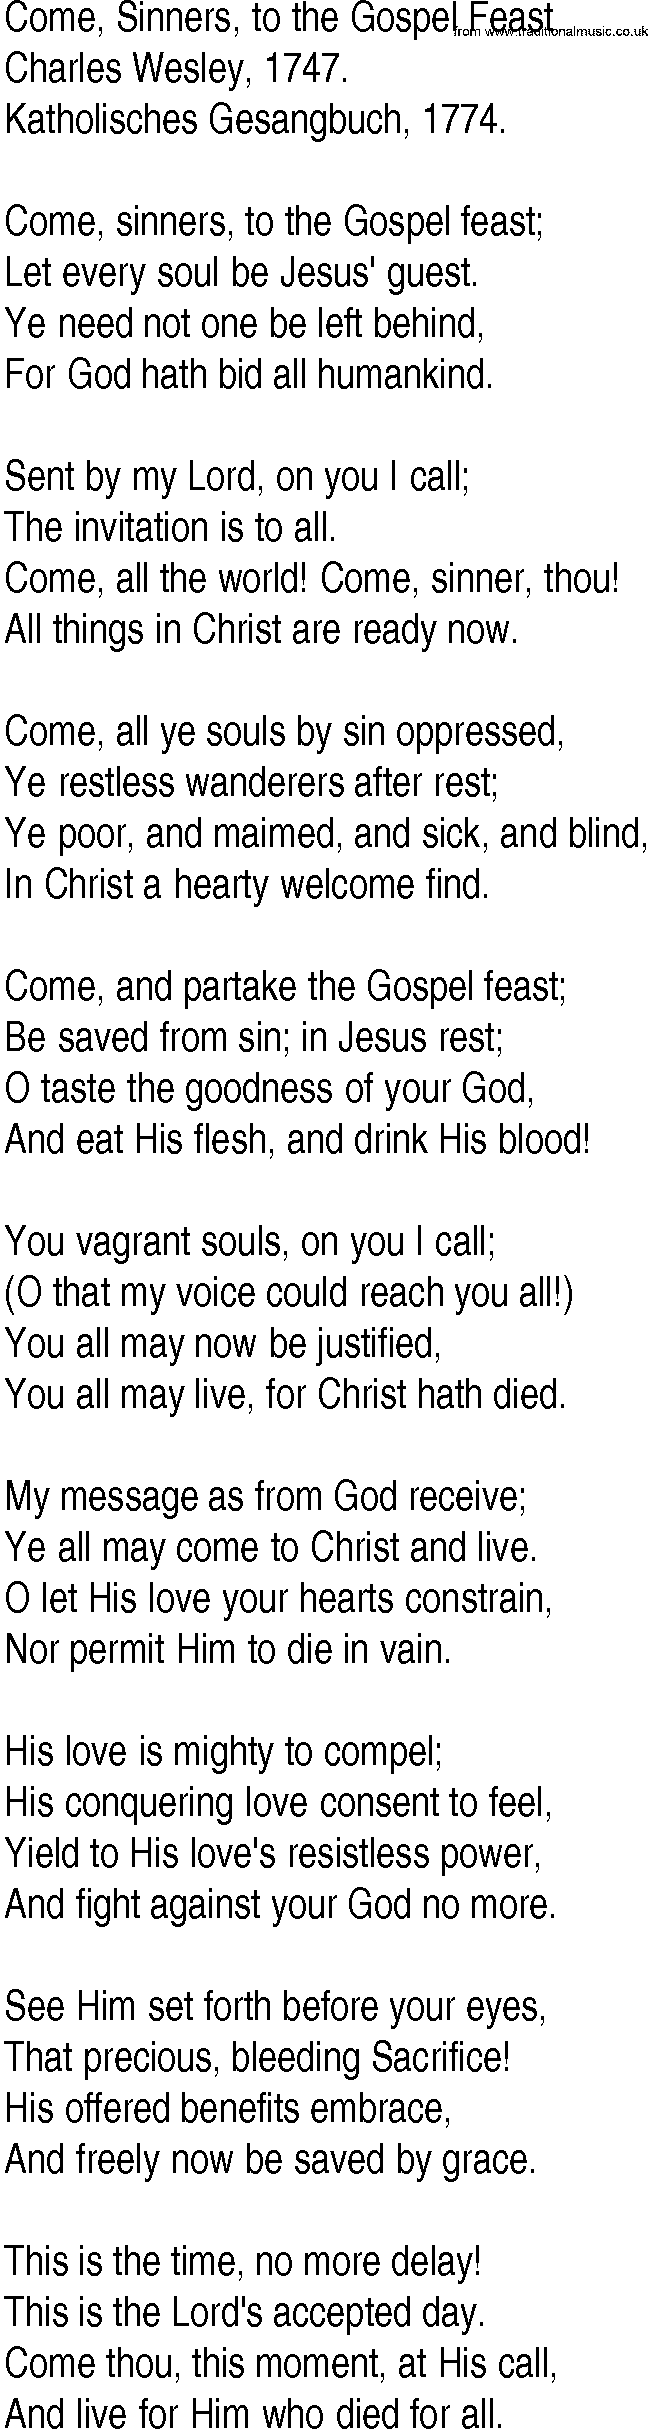 Hymn and Gospel Song: Come, Sinners, to the Gospel Feast by Charles Wesley lyrics